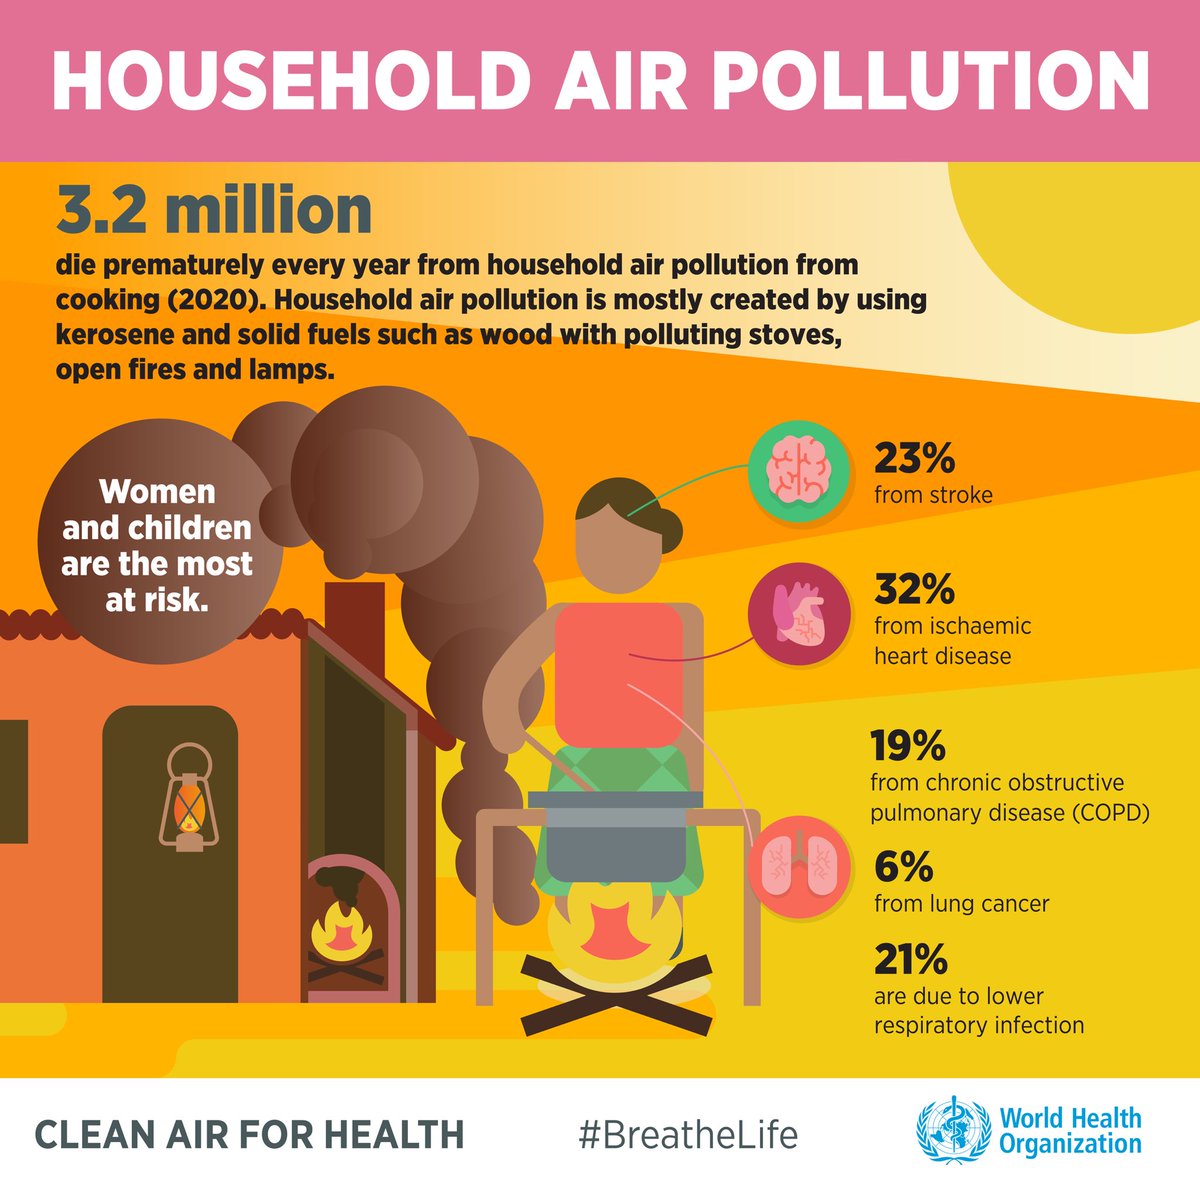 In advance of 14 May, Summit on Clean Cooking in Africa @IEA, important to remember how many people die prematurely every year from household air pollution.iea.li/3WzE7eN @WHO